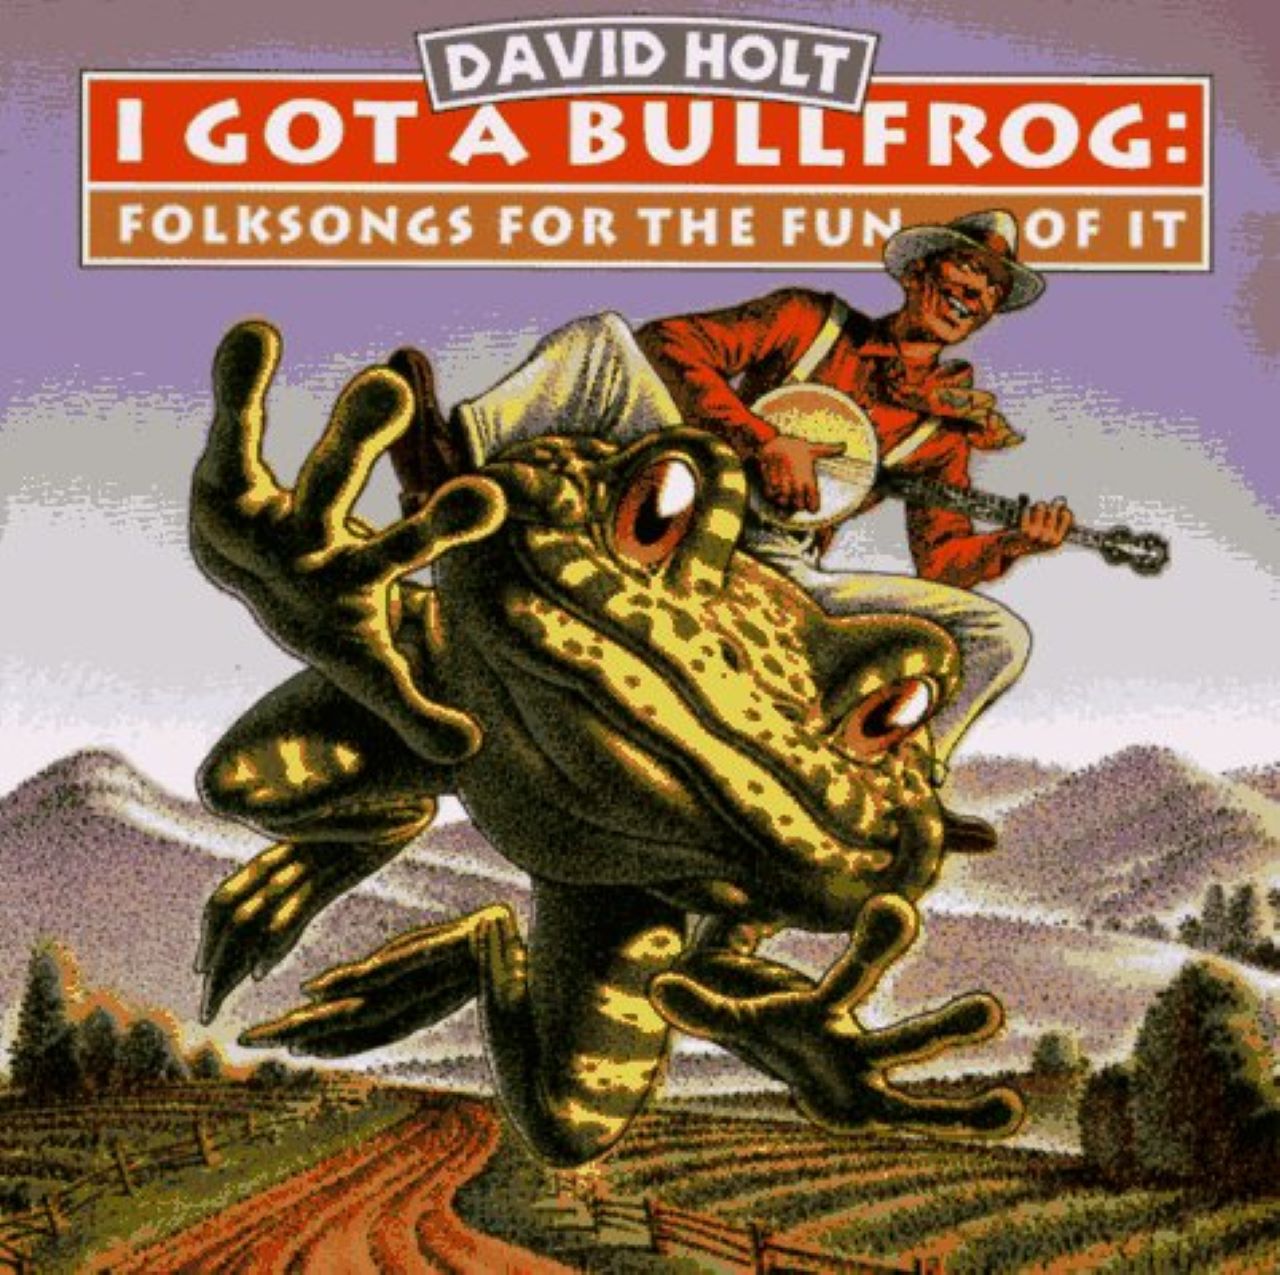 David Holt - I Got A Bullfrog Folksongs For The Fun Of It cover album